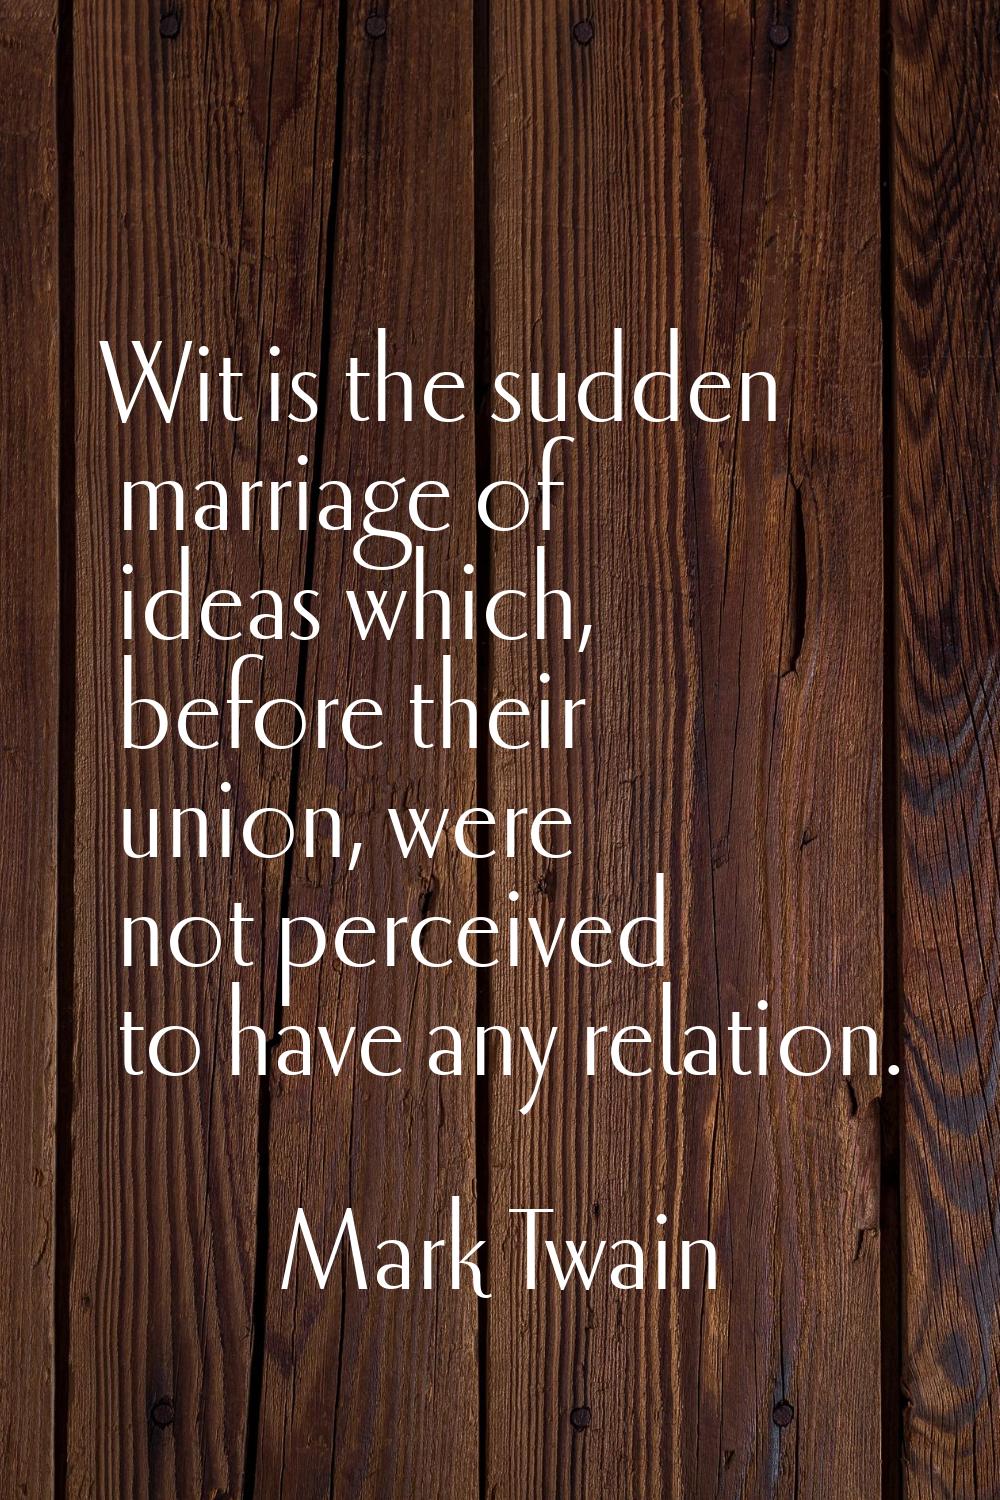 Wit is the sudden marriage of ideas which, before their union, were not perceived to have any relat